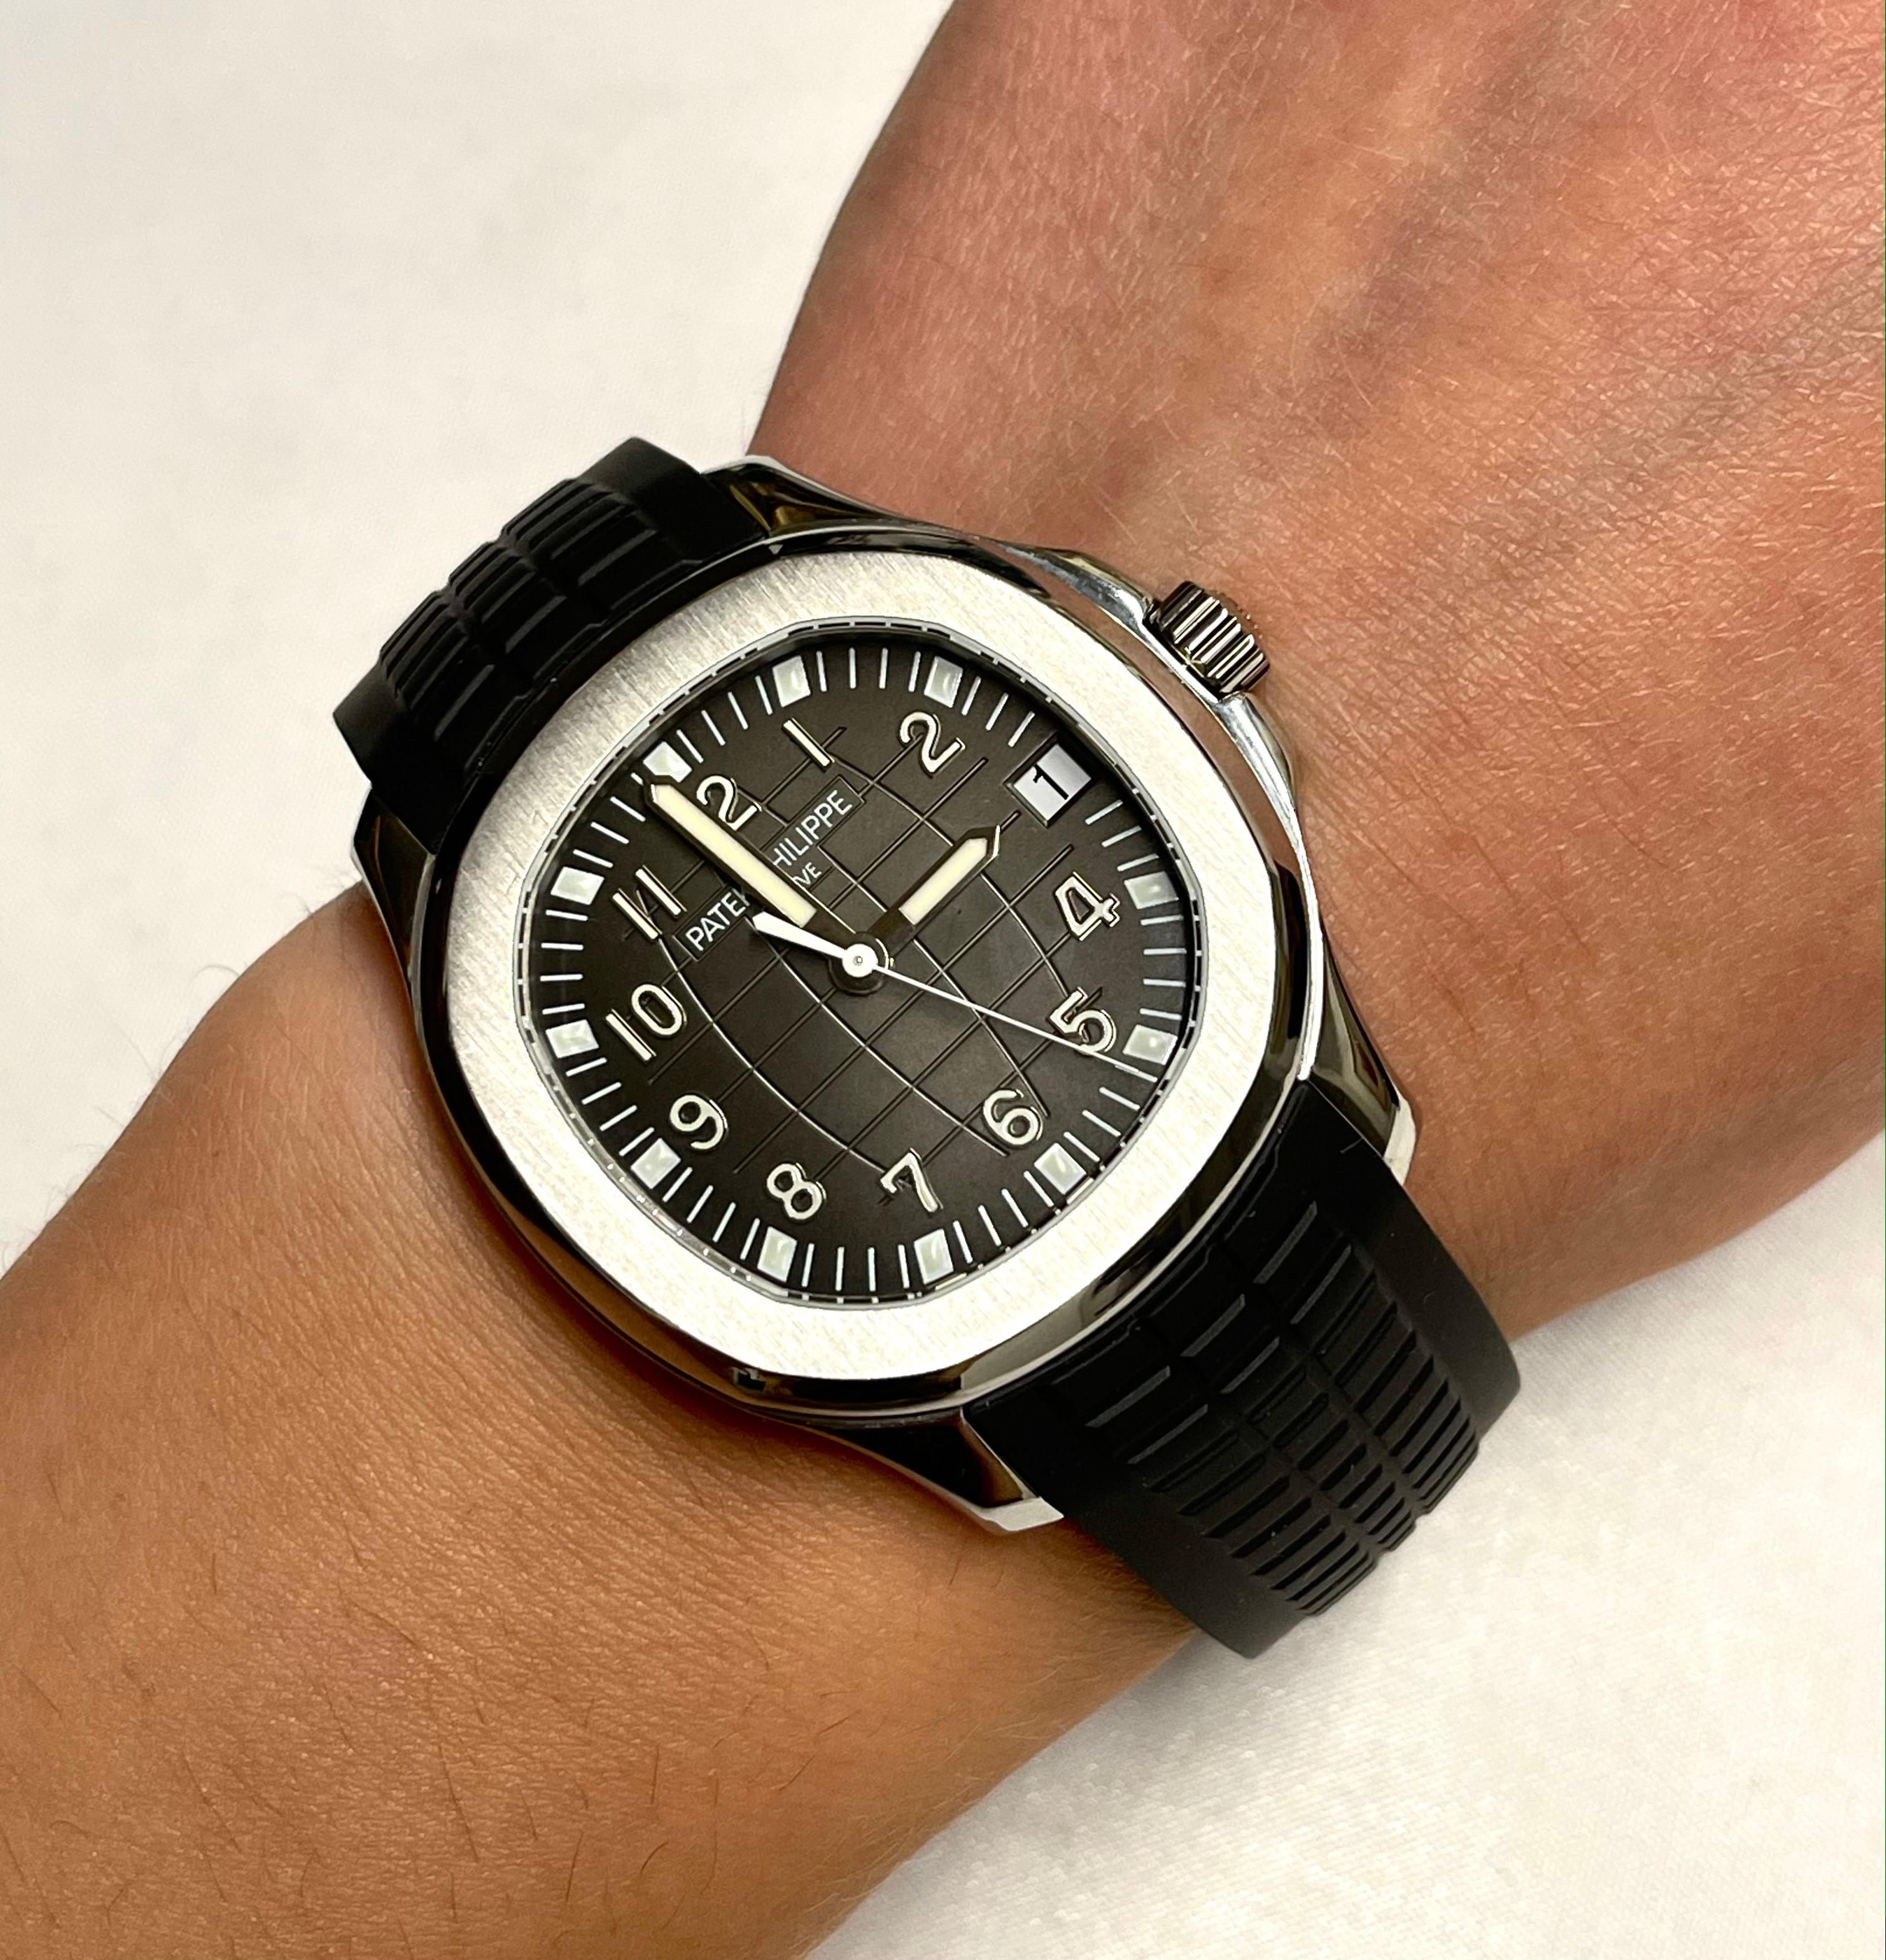 Patek Philippe & Tiffany's Co-Branded AQUANAUT REF#5165_001 Automatic Watch For Sale 3